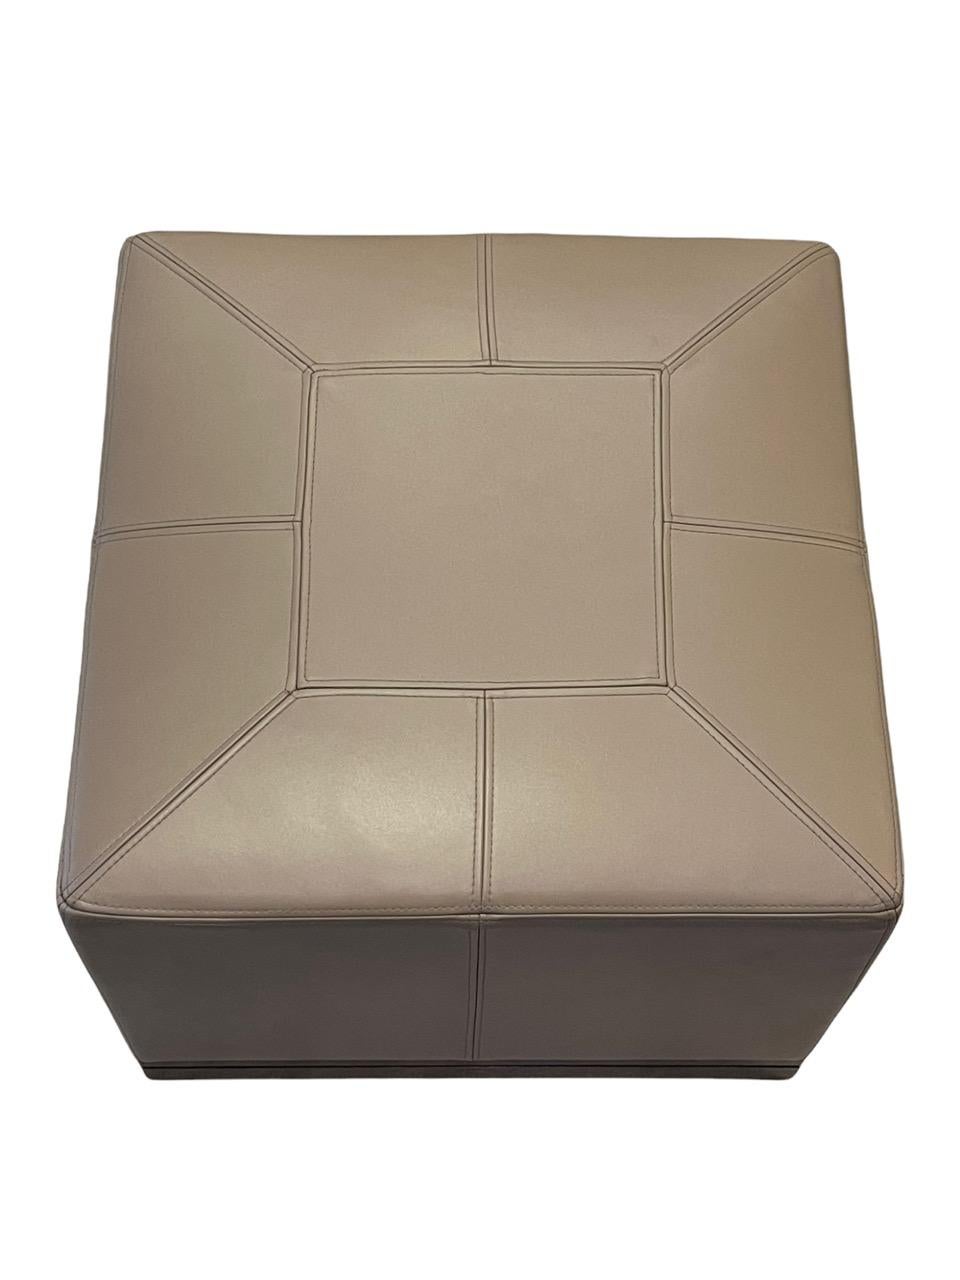 Custom Holly Hunt Archipelago ottoman in taupe color. It is designed with linear stitching pattern and walnut base. The brand is very unique and offers a curated experience featuring their designs as well as represented collections from designers,